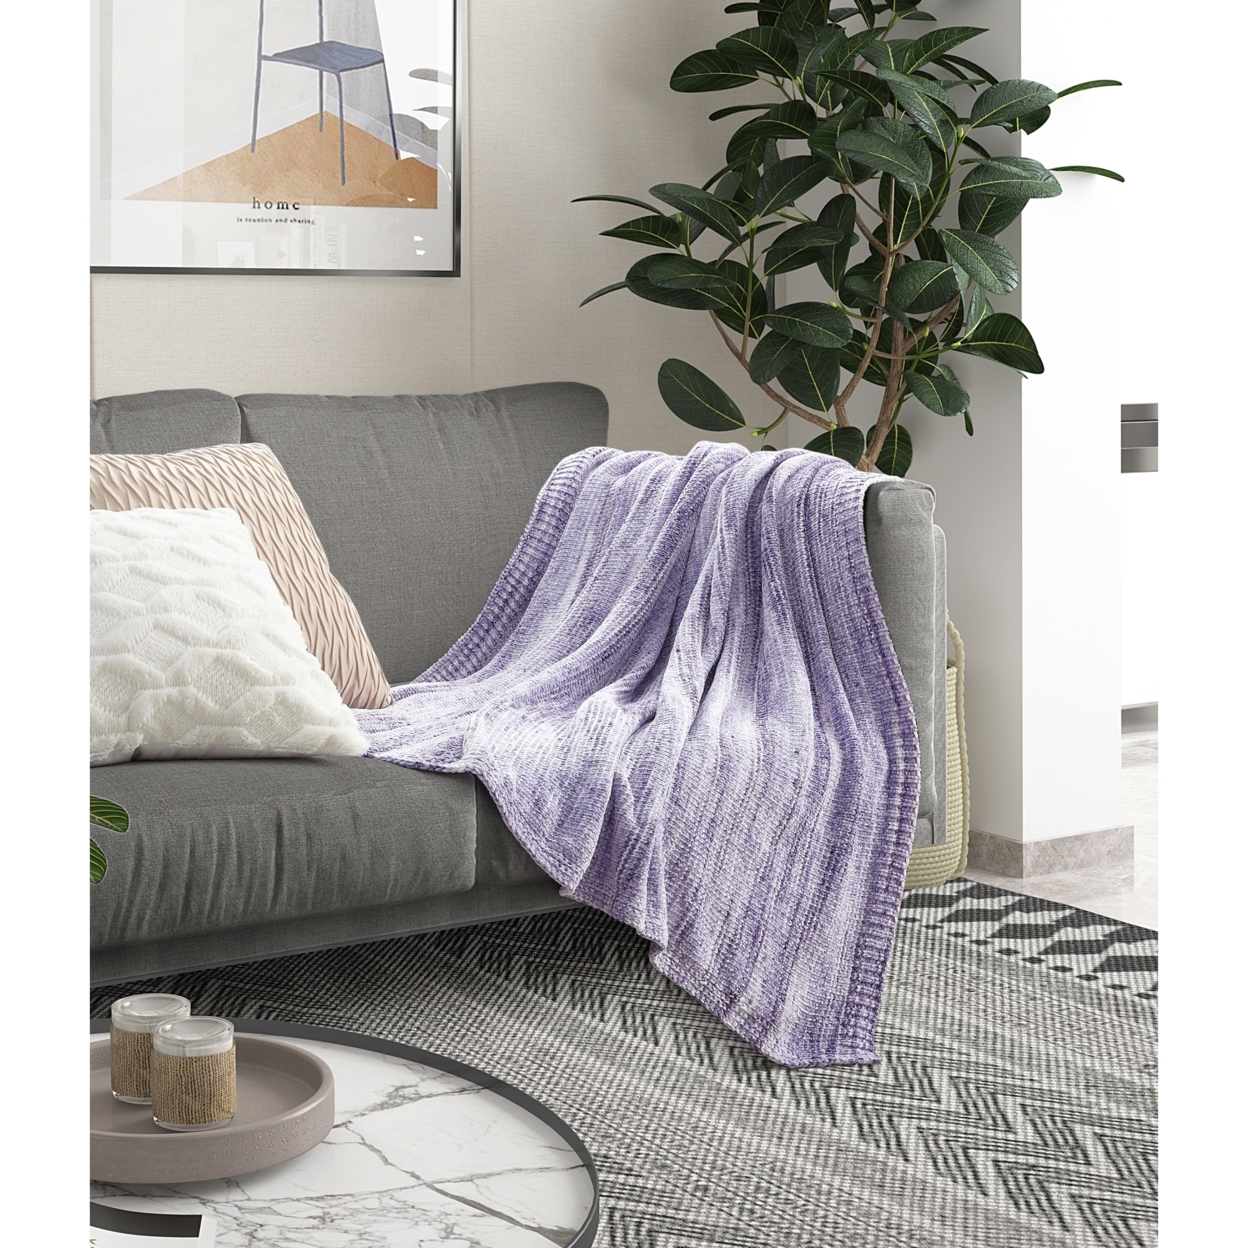 Malani Throw-Space Dye Chenille-Cozy And Lightweight-Soft - Purple